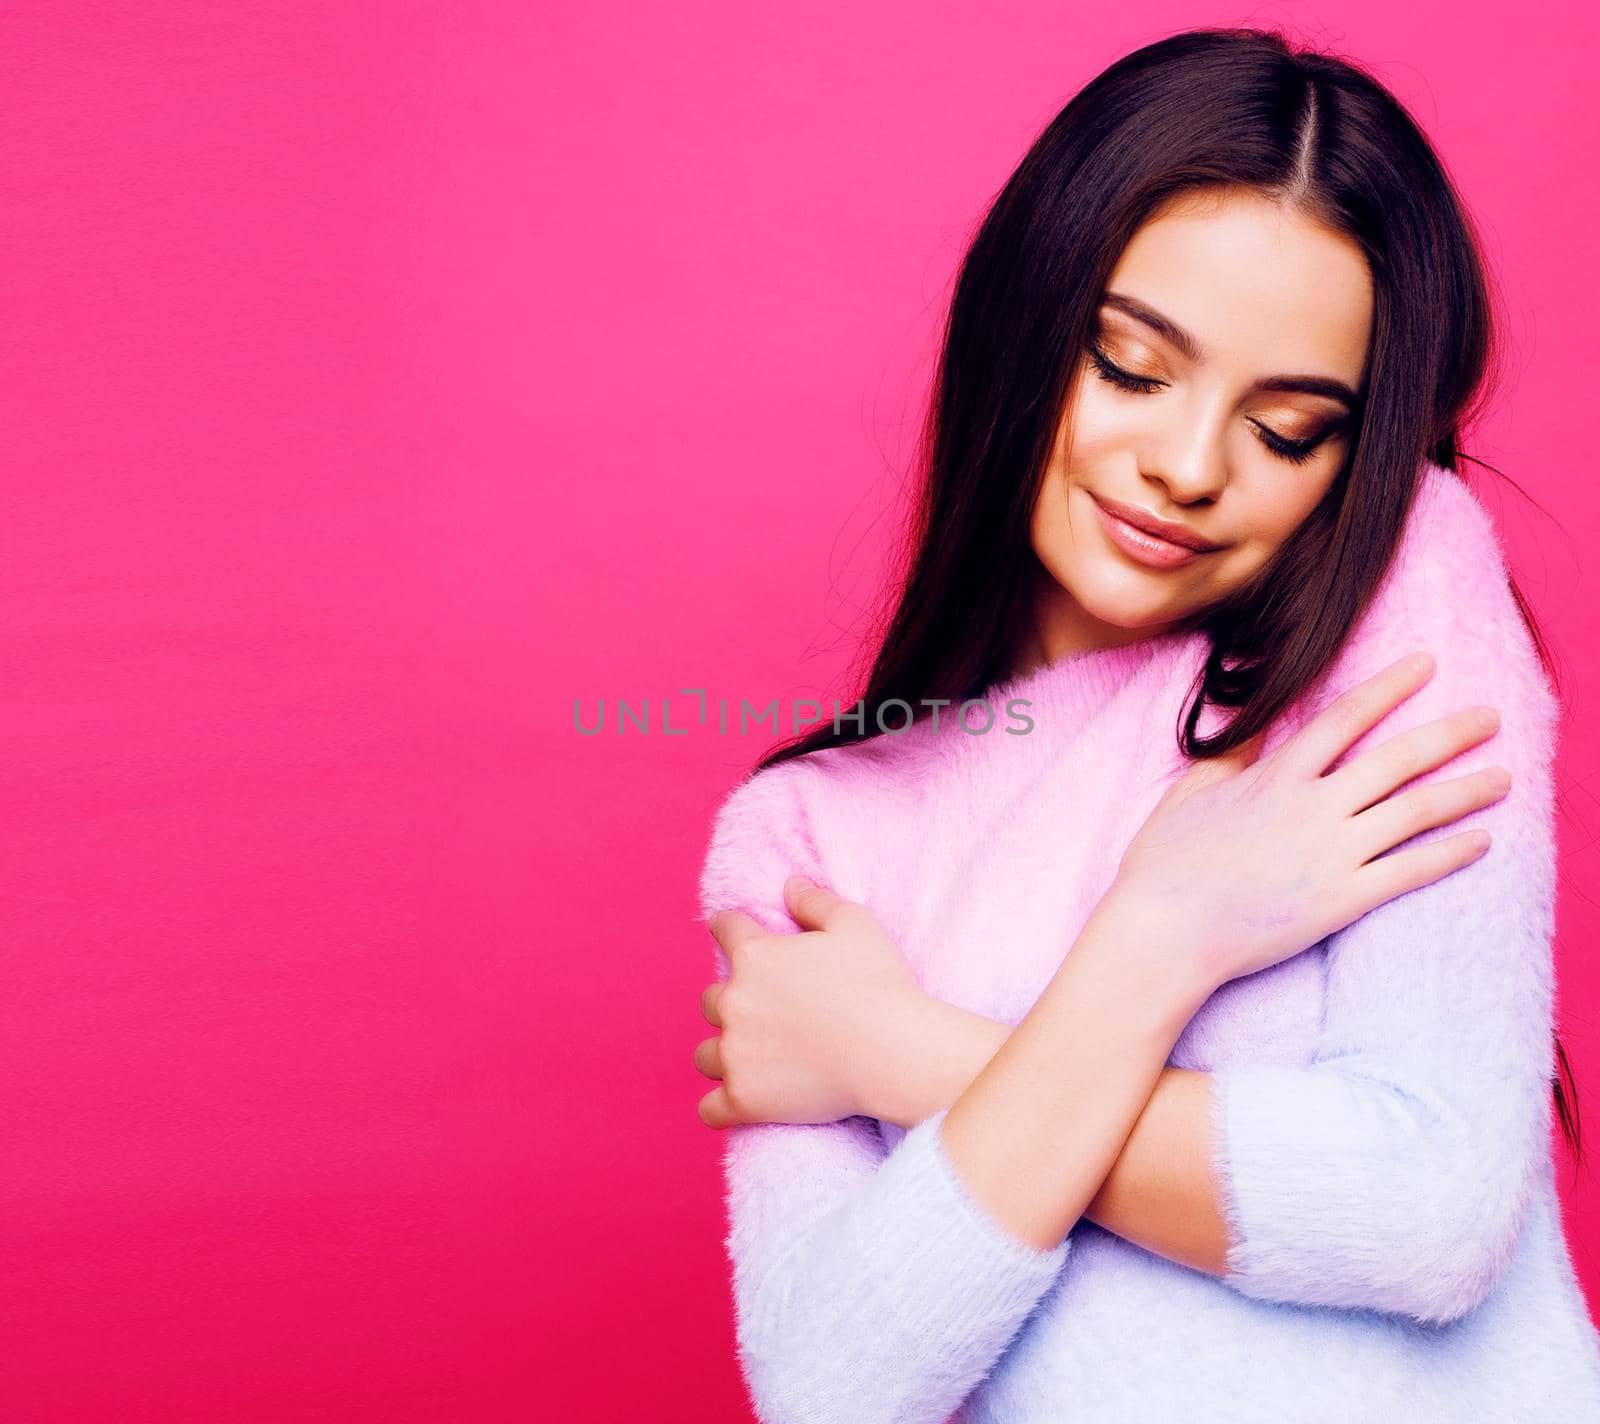 young pretty girl with brunette long hair posing cheerful on pink background, lifestyle people concept close up